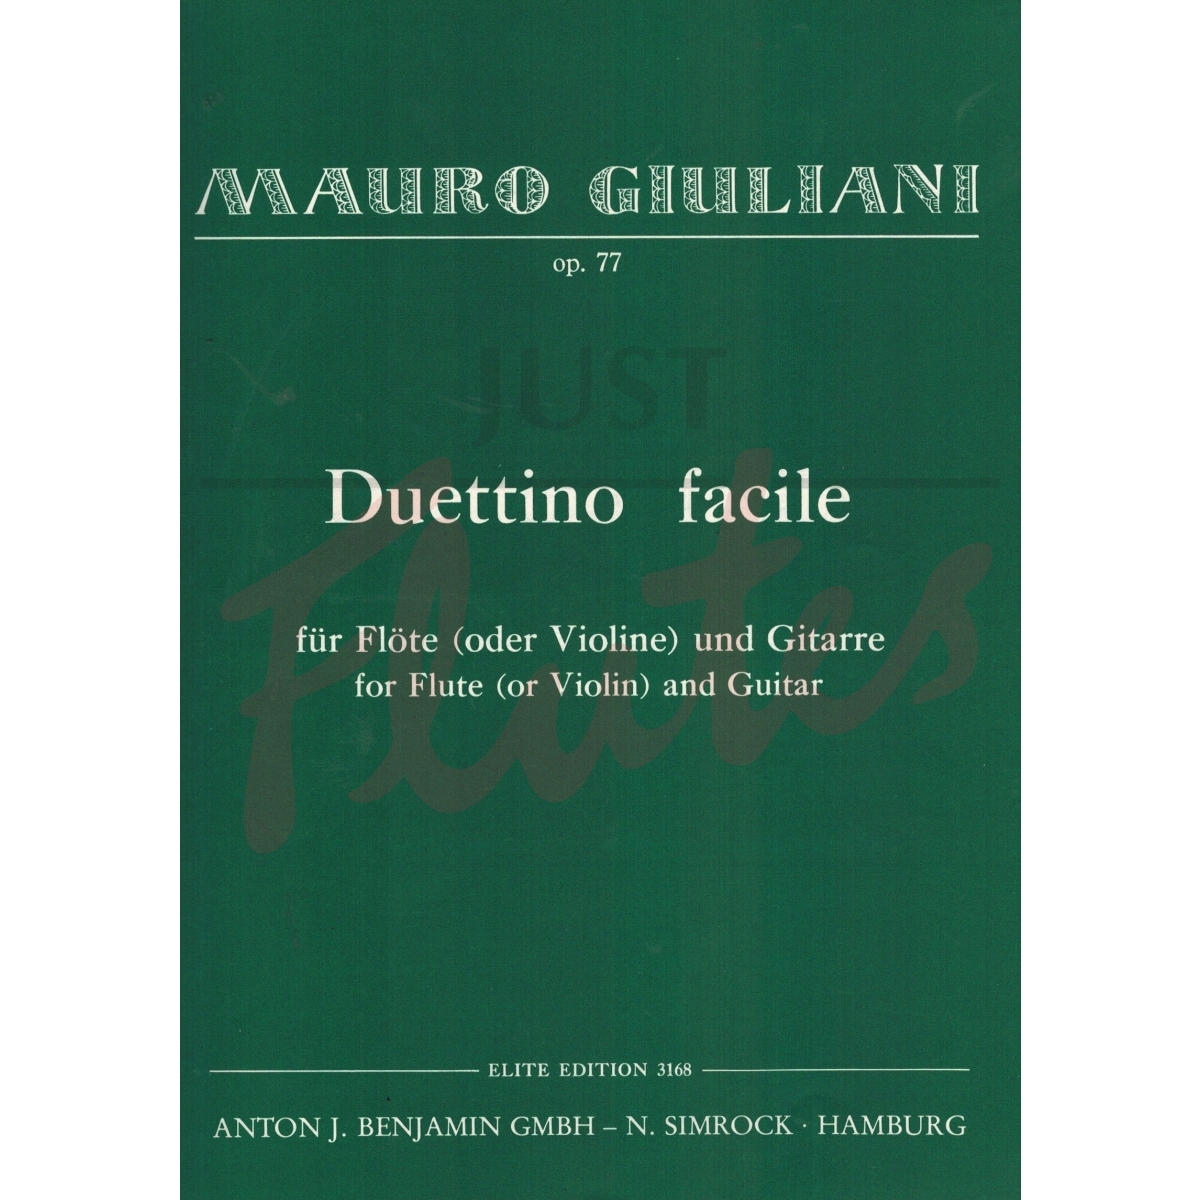 Duettino Facile for Flute (or Violin) and Guitar